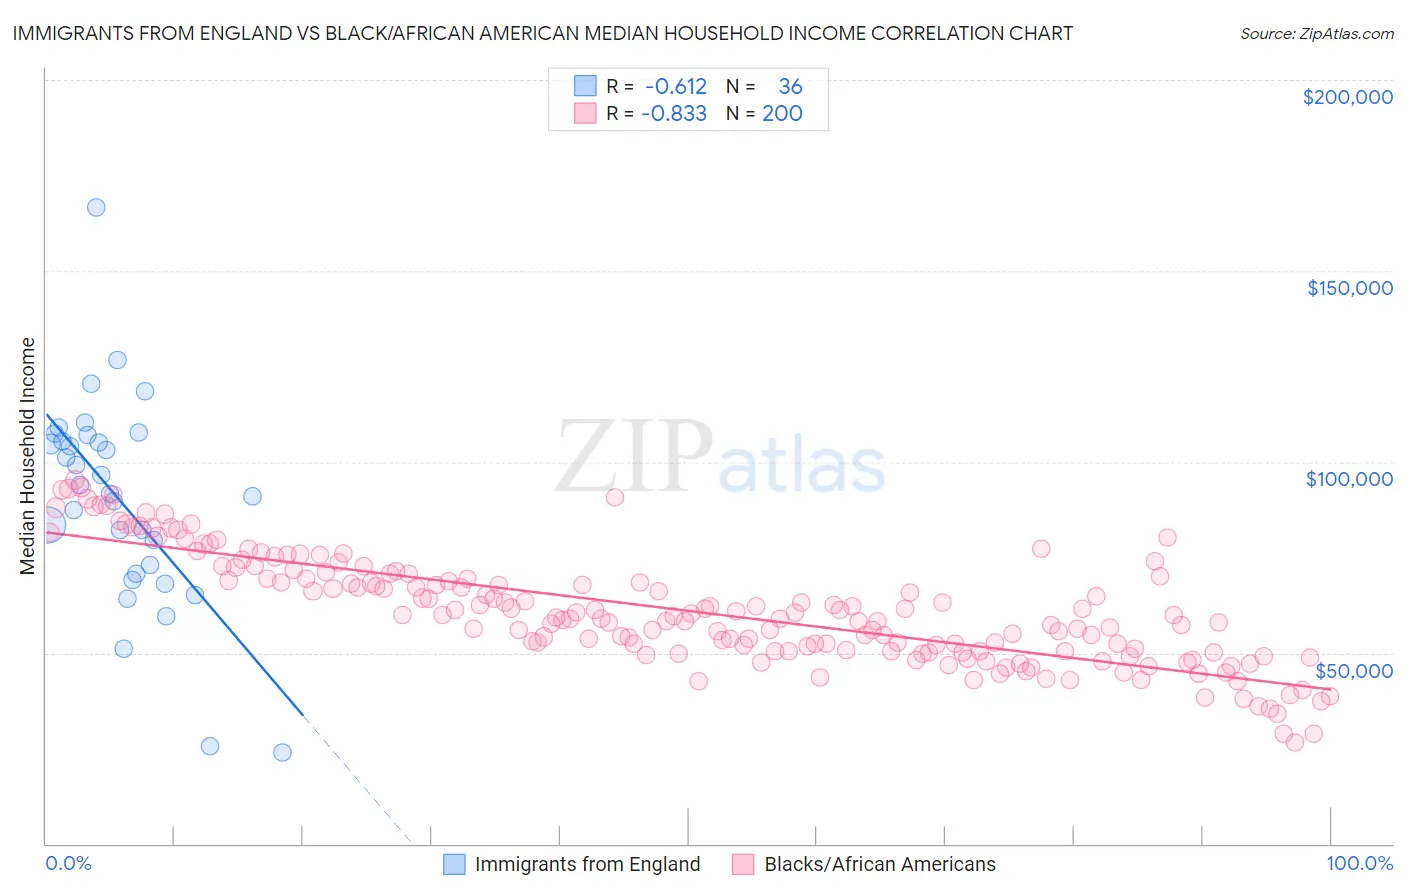 Immigrants from England vs Black/African American Median Household Income